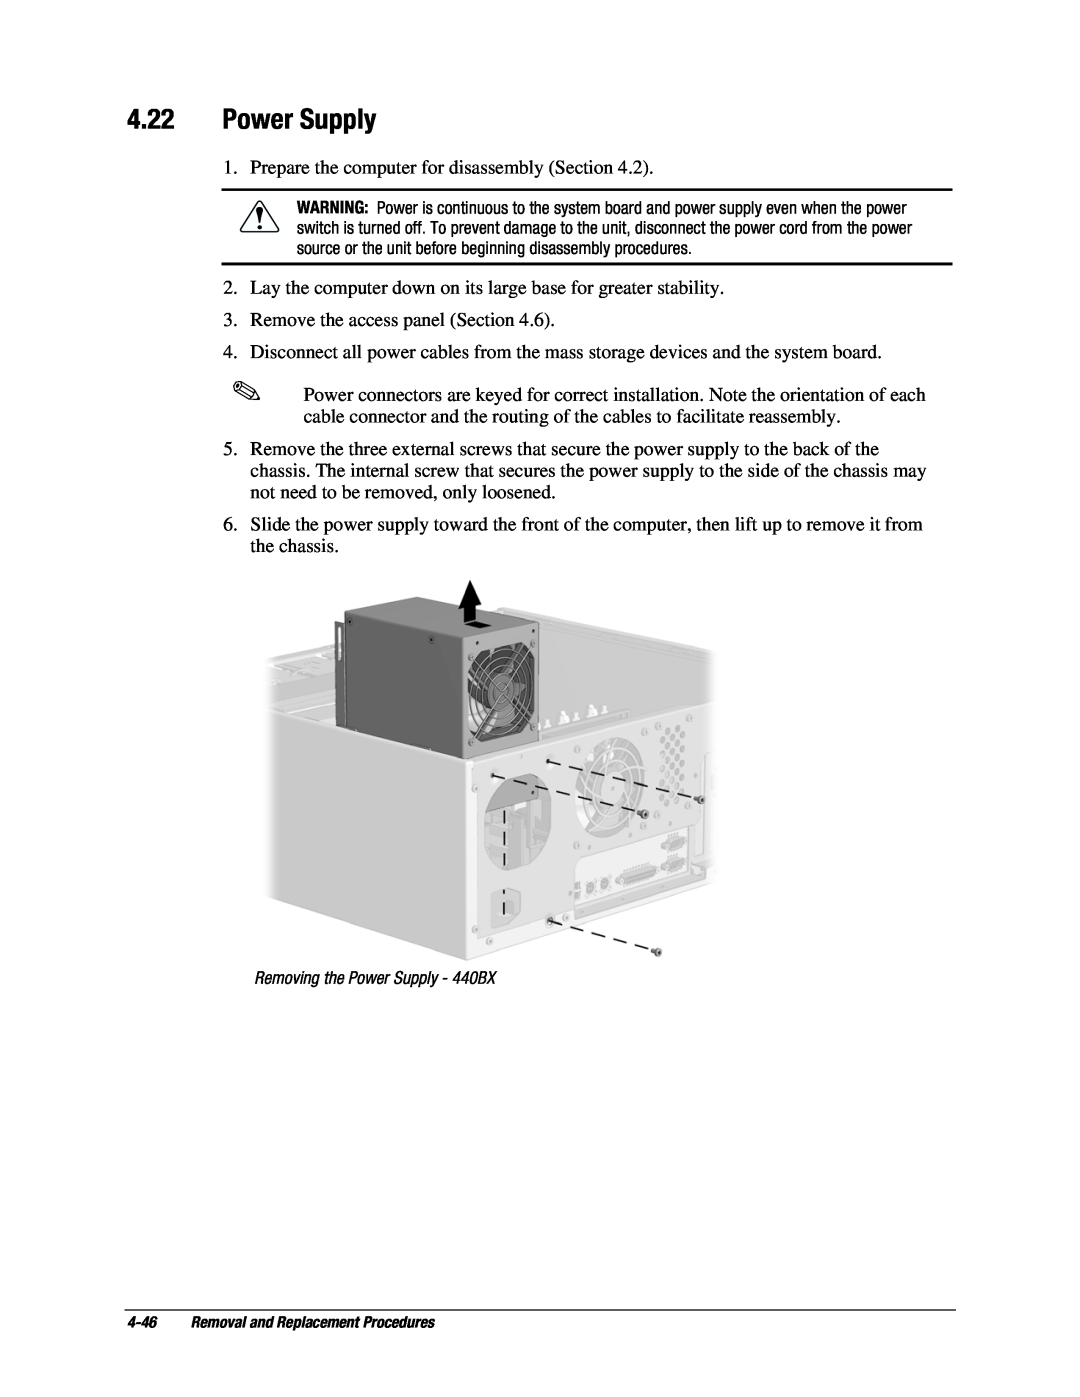 Compaq EP Series manual Removing the Power Supply - 440BX 